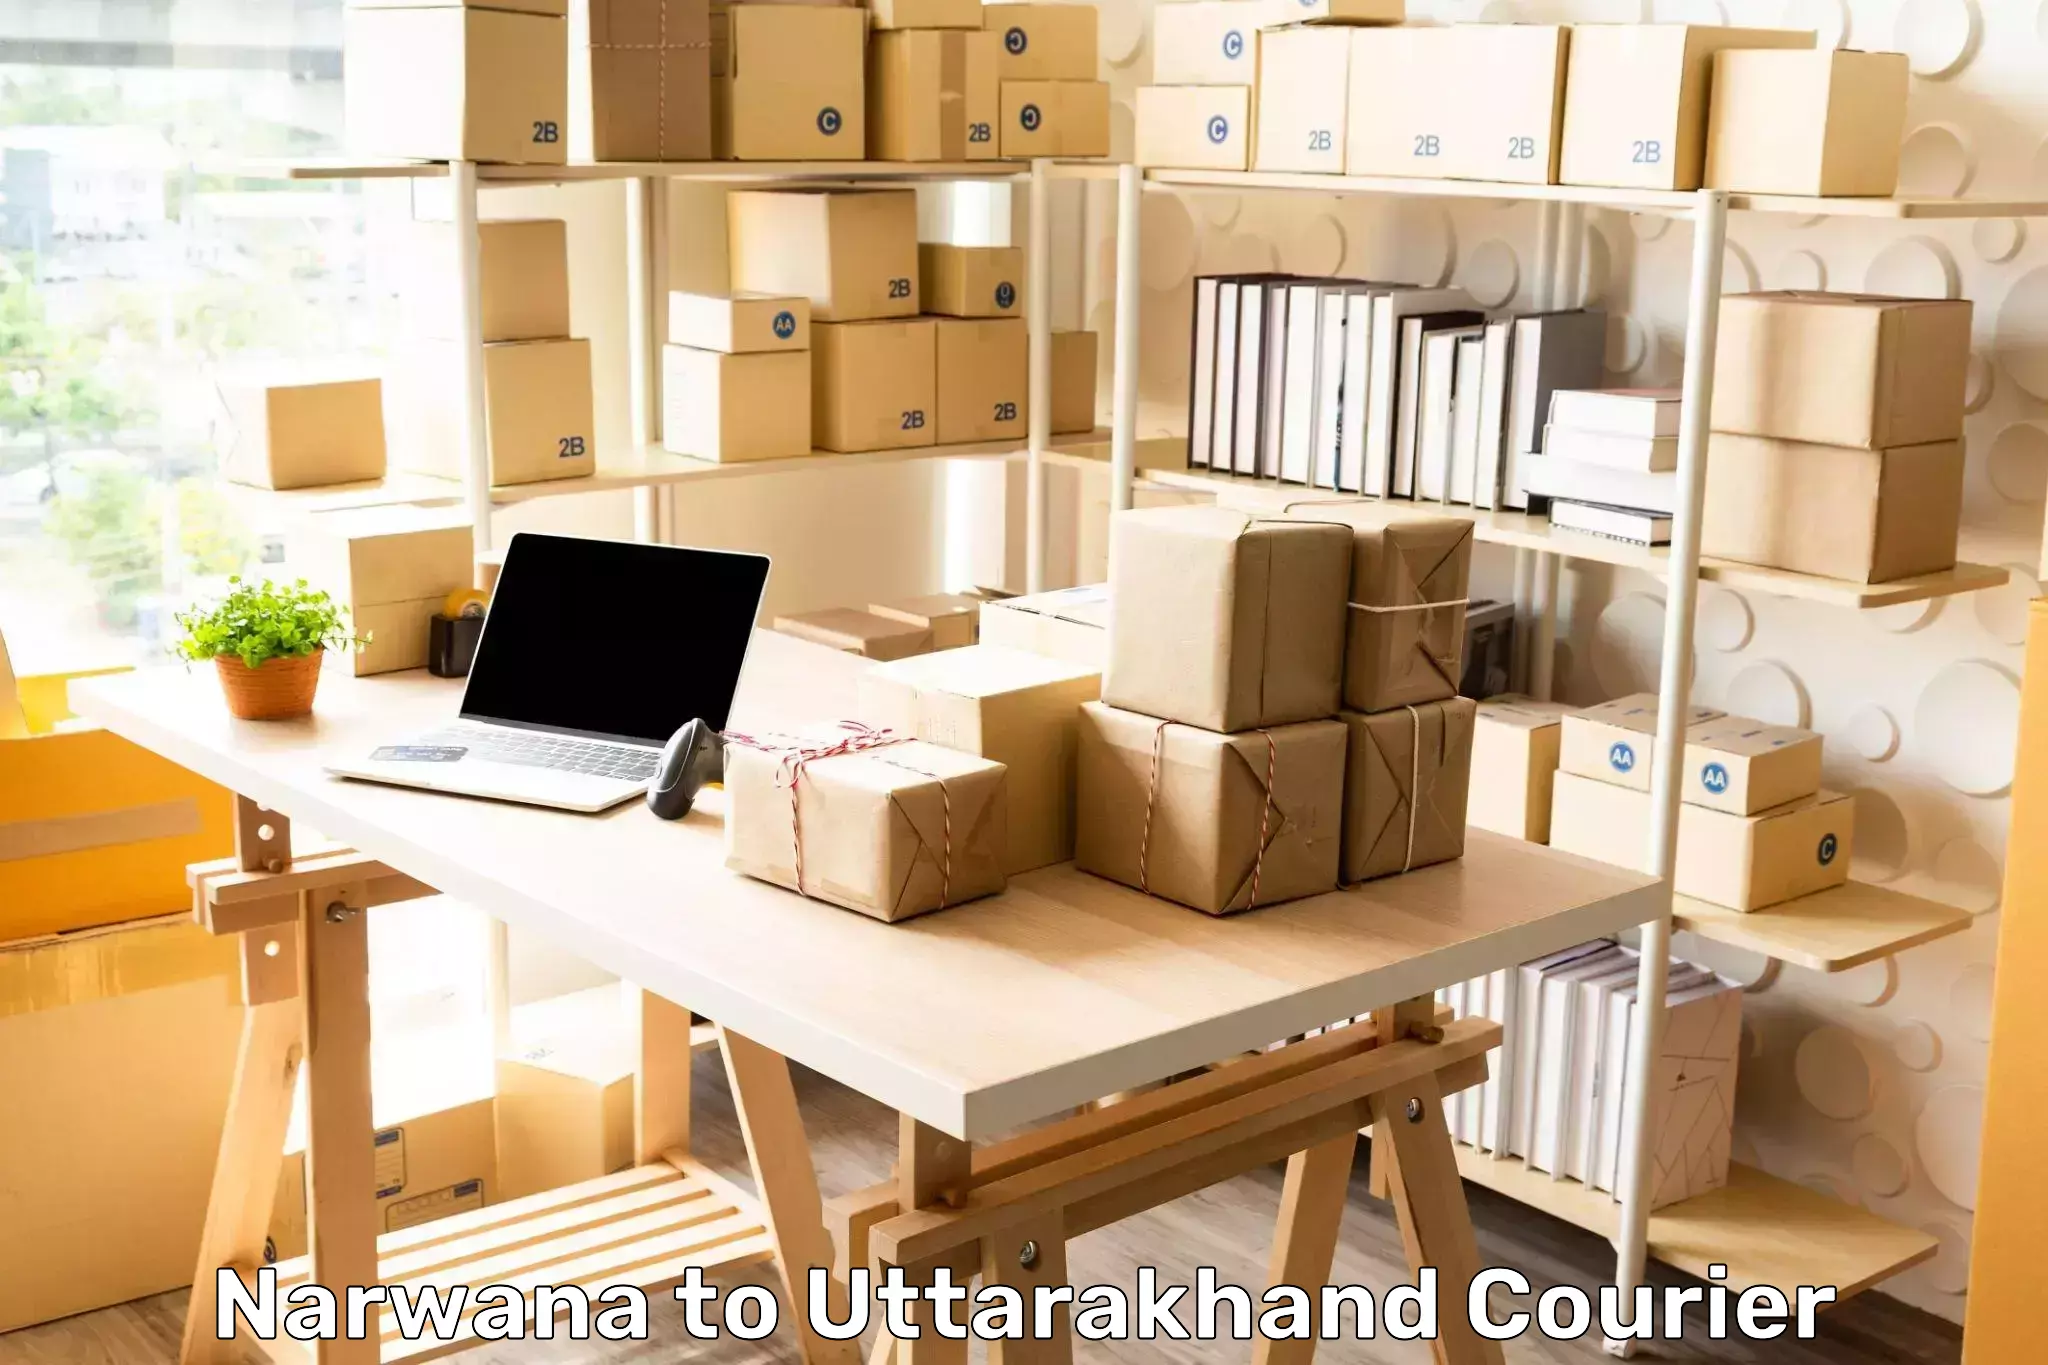 Multi-service courier options Narwana to Tehri Garhwal